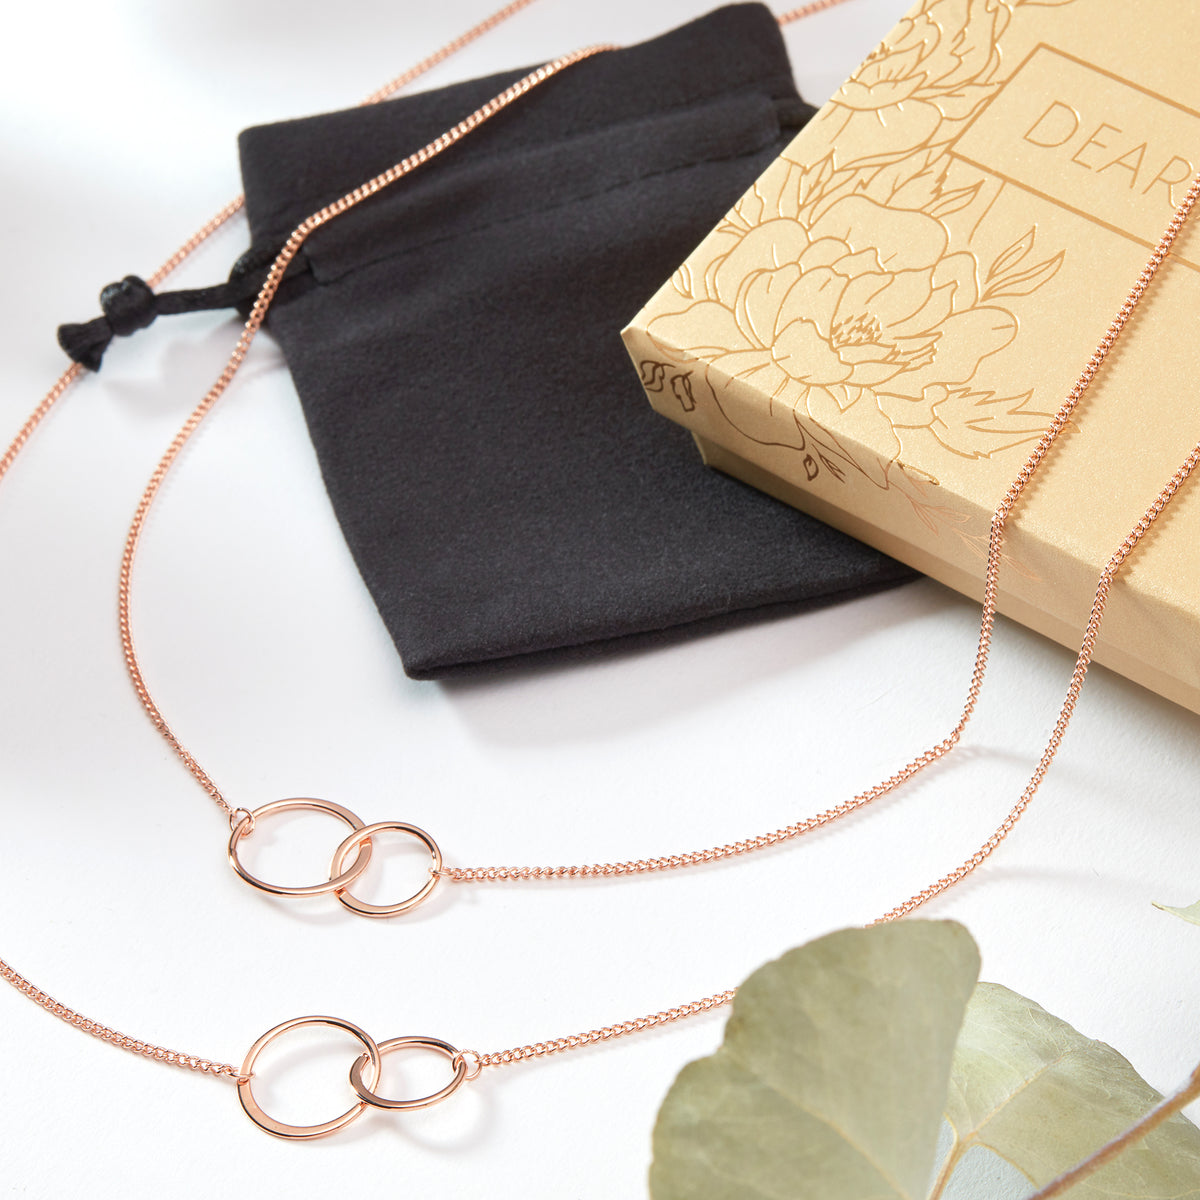 Sisters Double Circles Necklace Set